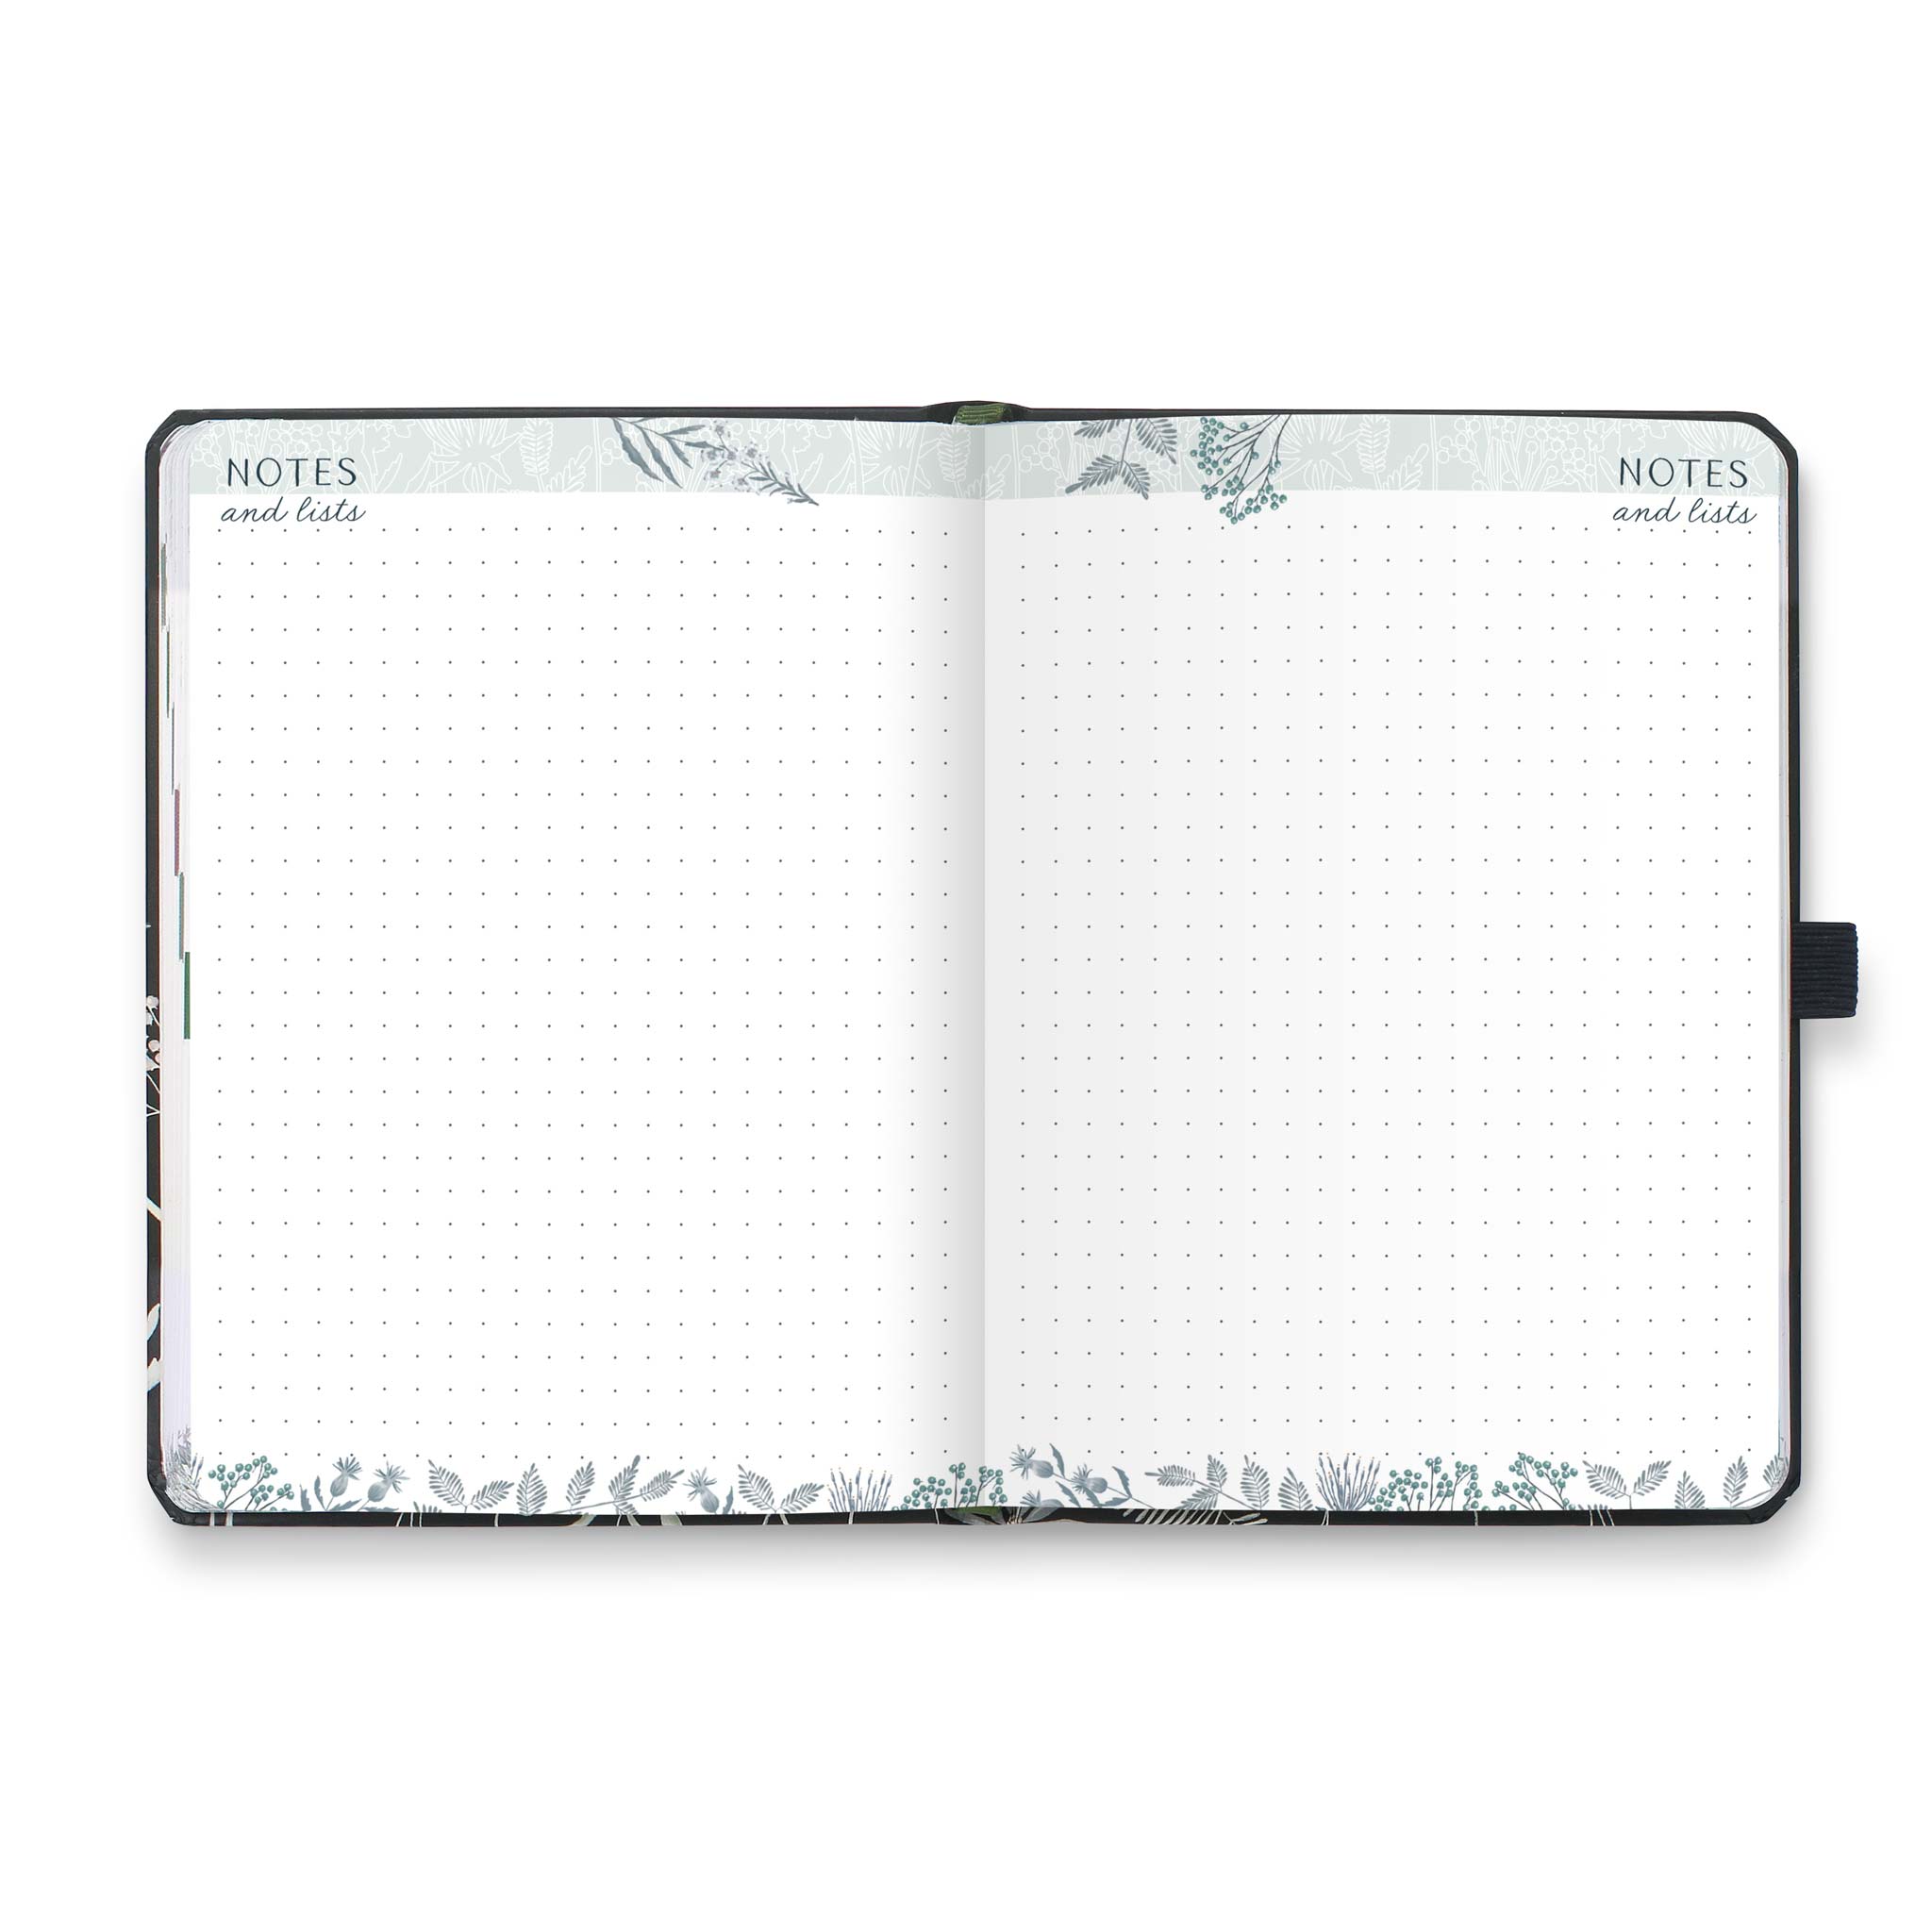 An open diary with dotted notes and lists pages